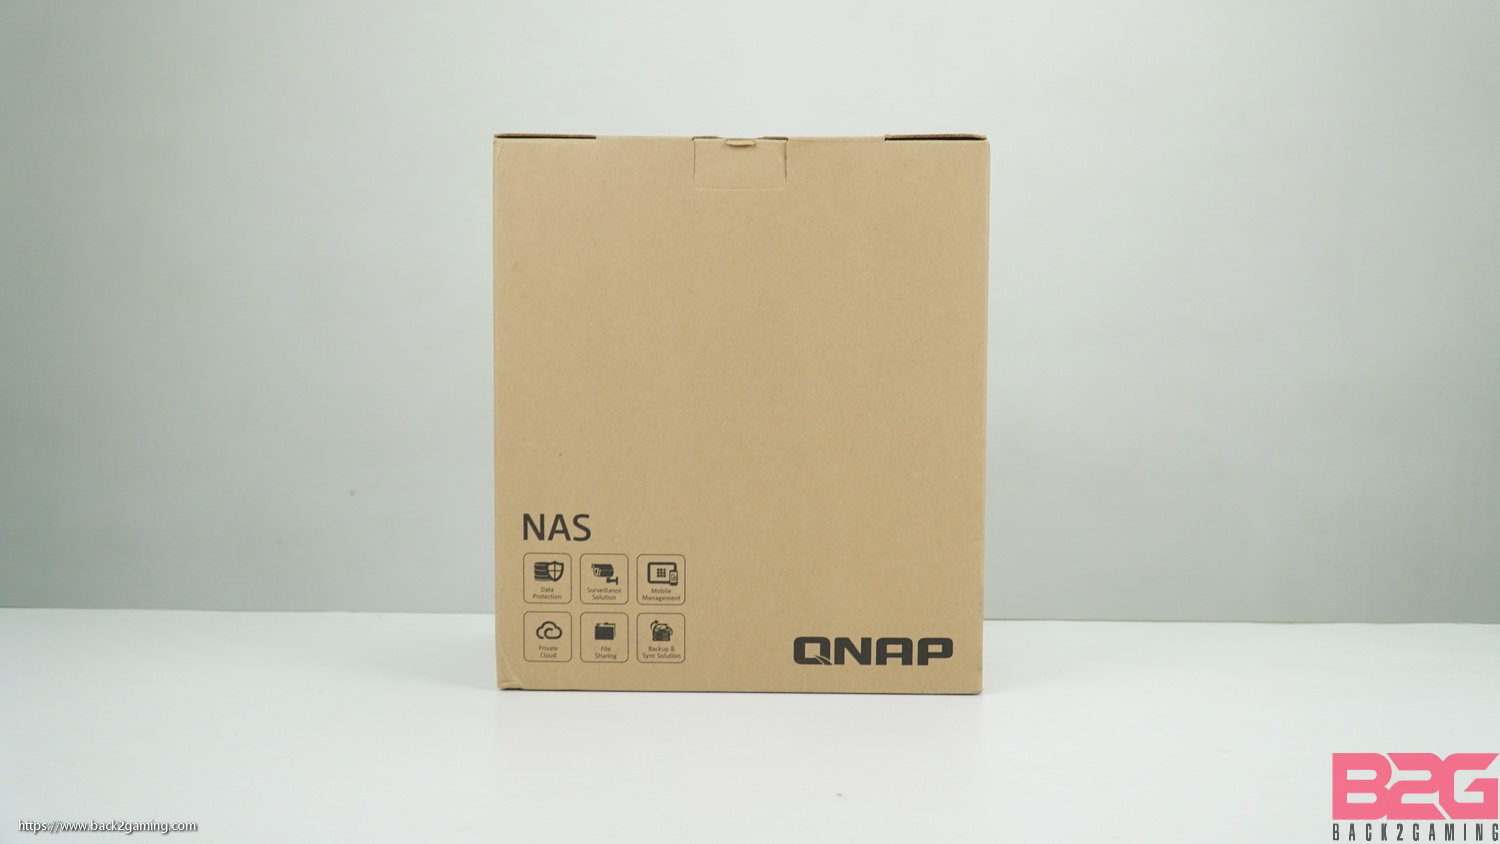 QNAP TS-328 3-Bay NAS Preview and Initial Impressions -